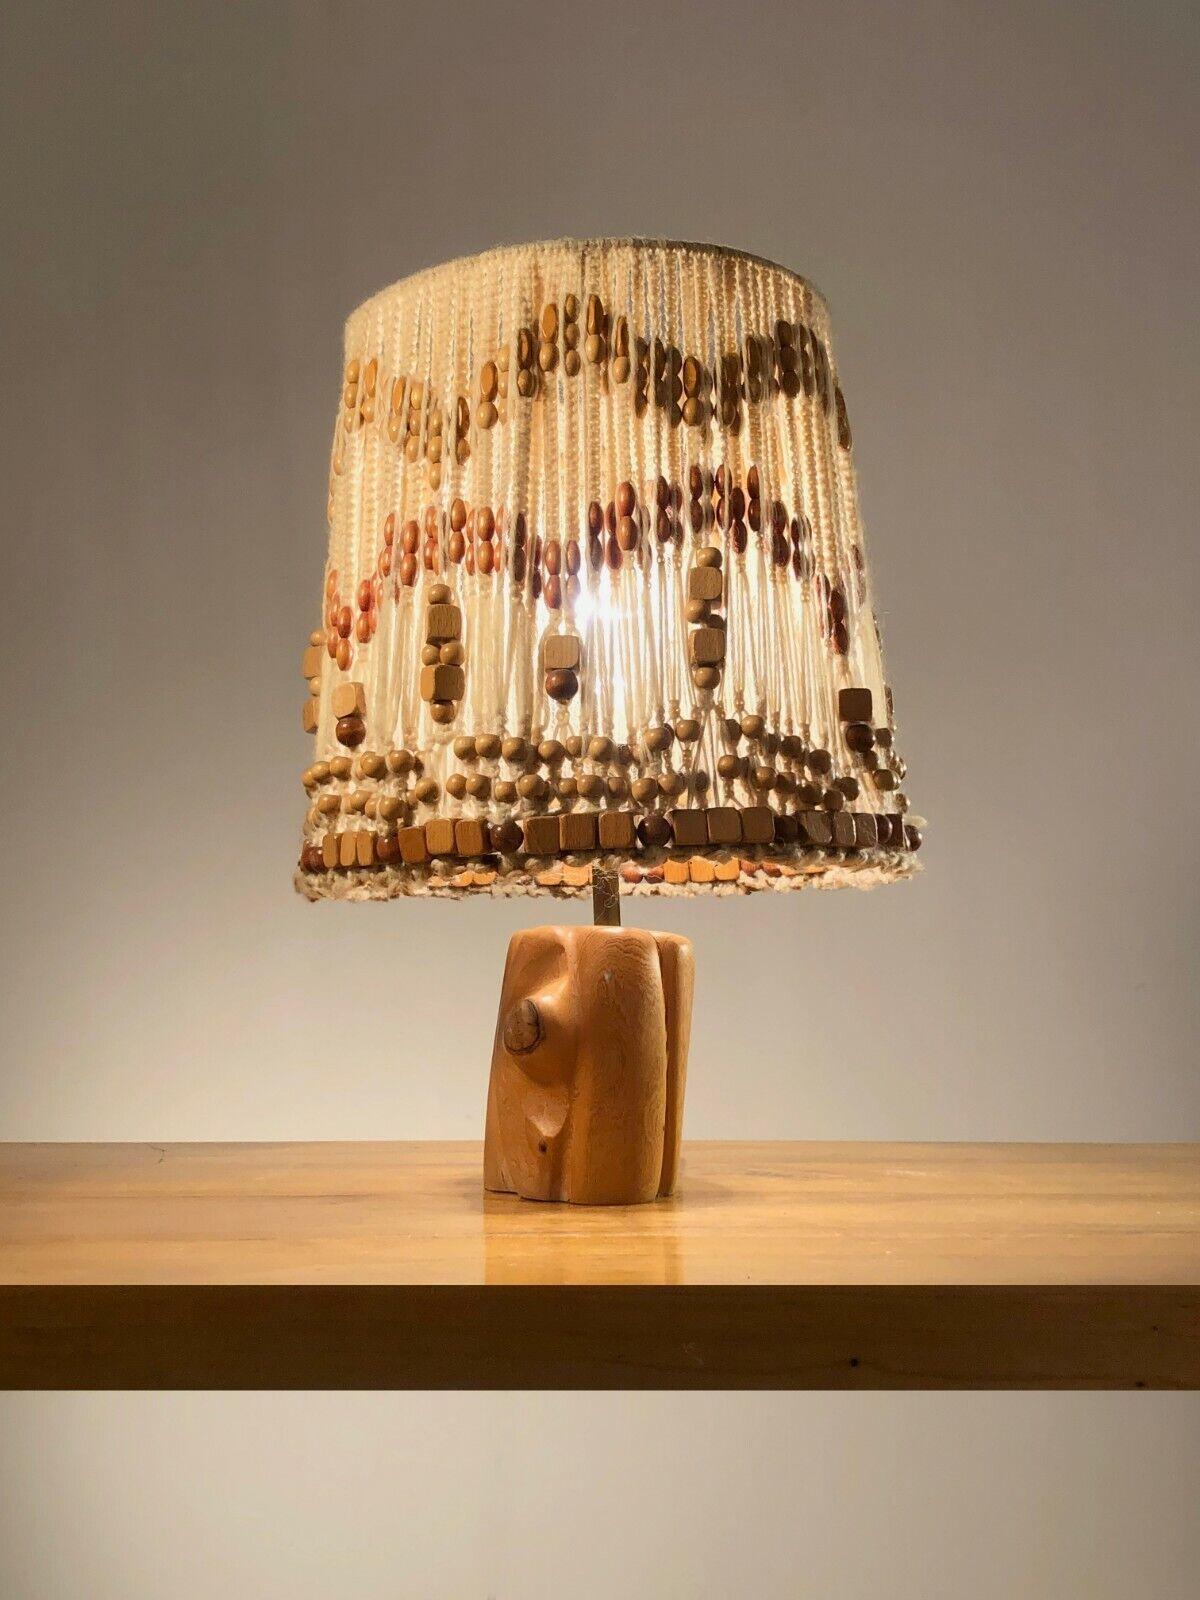 An exceptionally beautiful table lamp, Modernist, Hippie, Free-Form, Brutalist, Rustic-Modern, Folk Art, base in a superb piece of carved wood, topped with an incredible lampshade in rope and woven beads, to be attributed , France 1970.

DIMENSIONS: